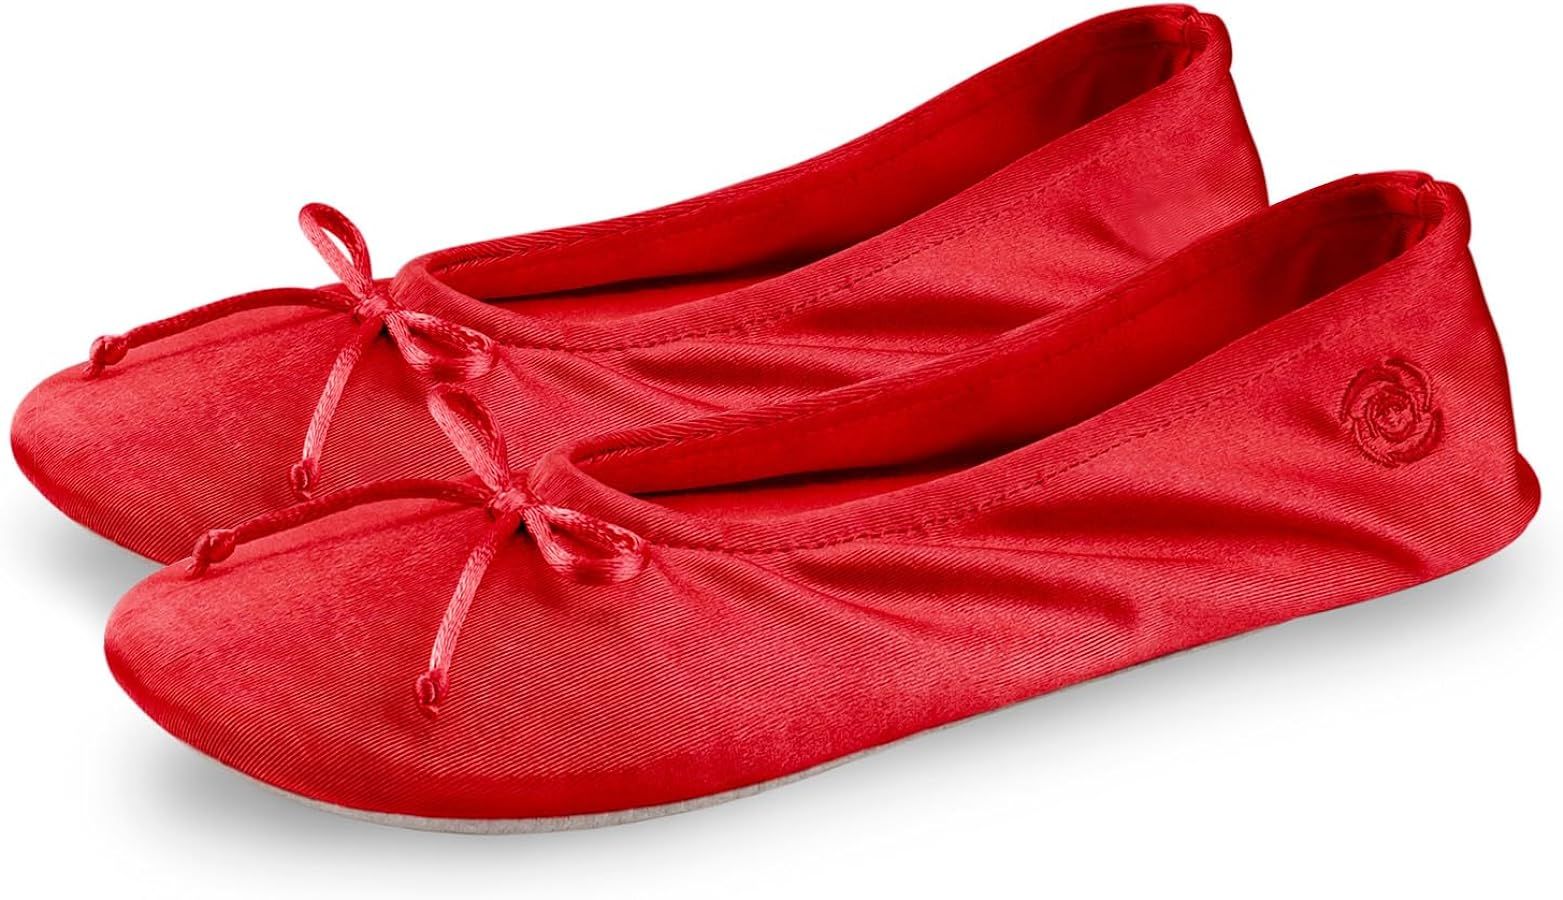 BCTEX COLL Women's Ballerina House Slippers with Bow, Ladies Satin Bedroom Slipper with Suede Sol... | Amazon (US)